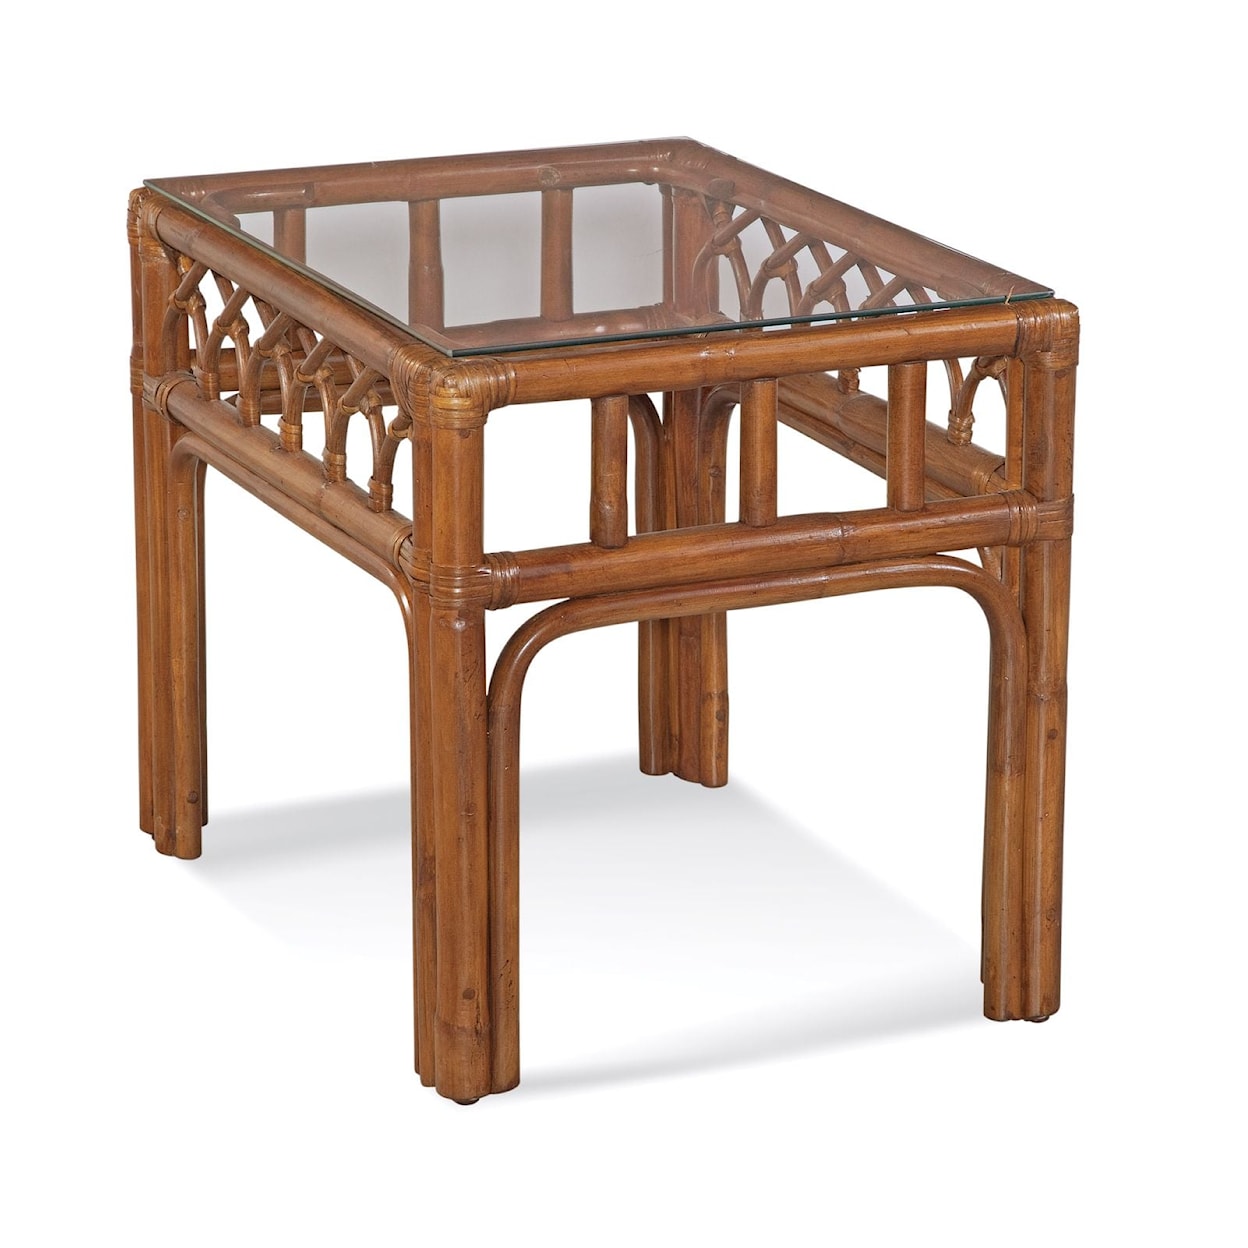 Braxton Culler Edgewater Edgewater End Table